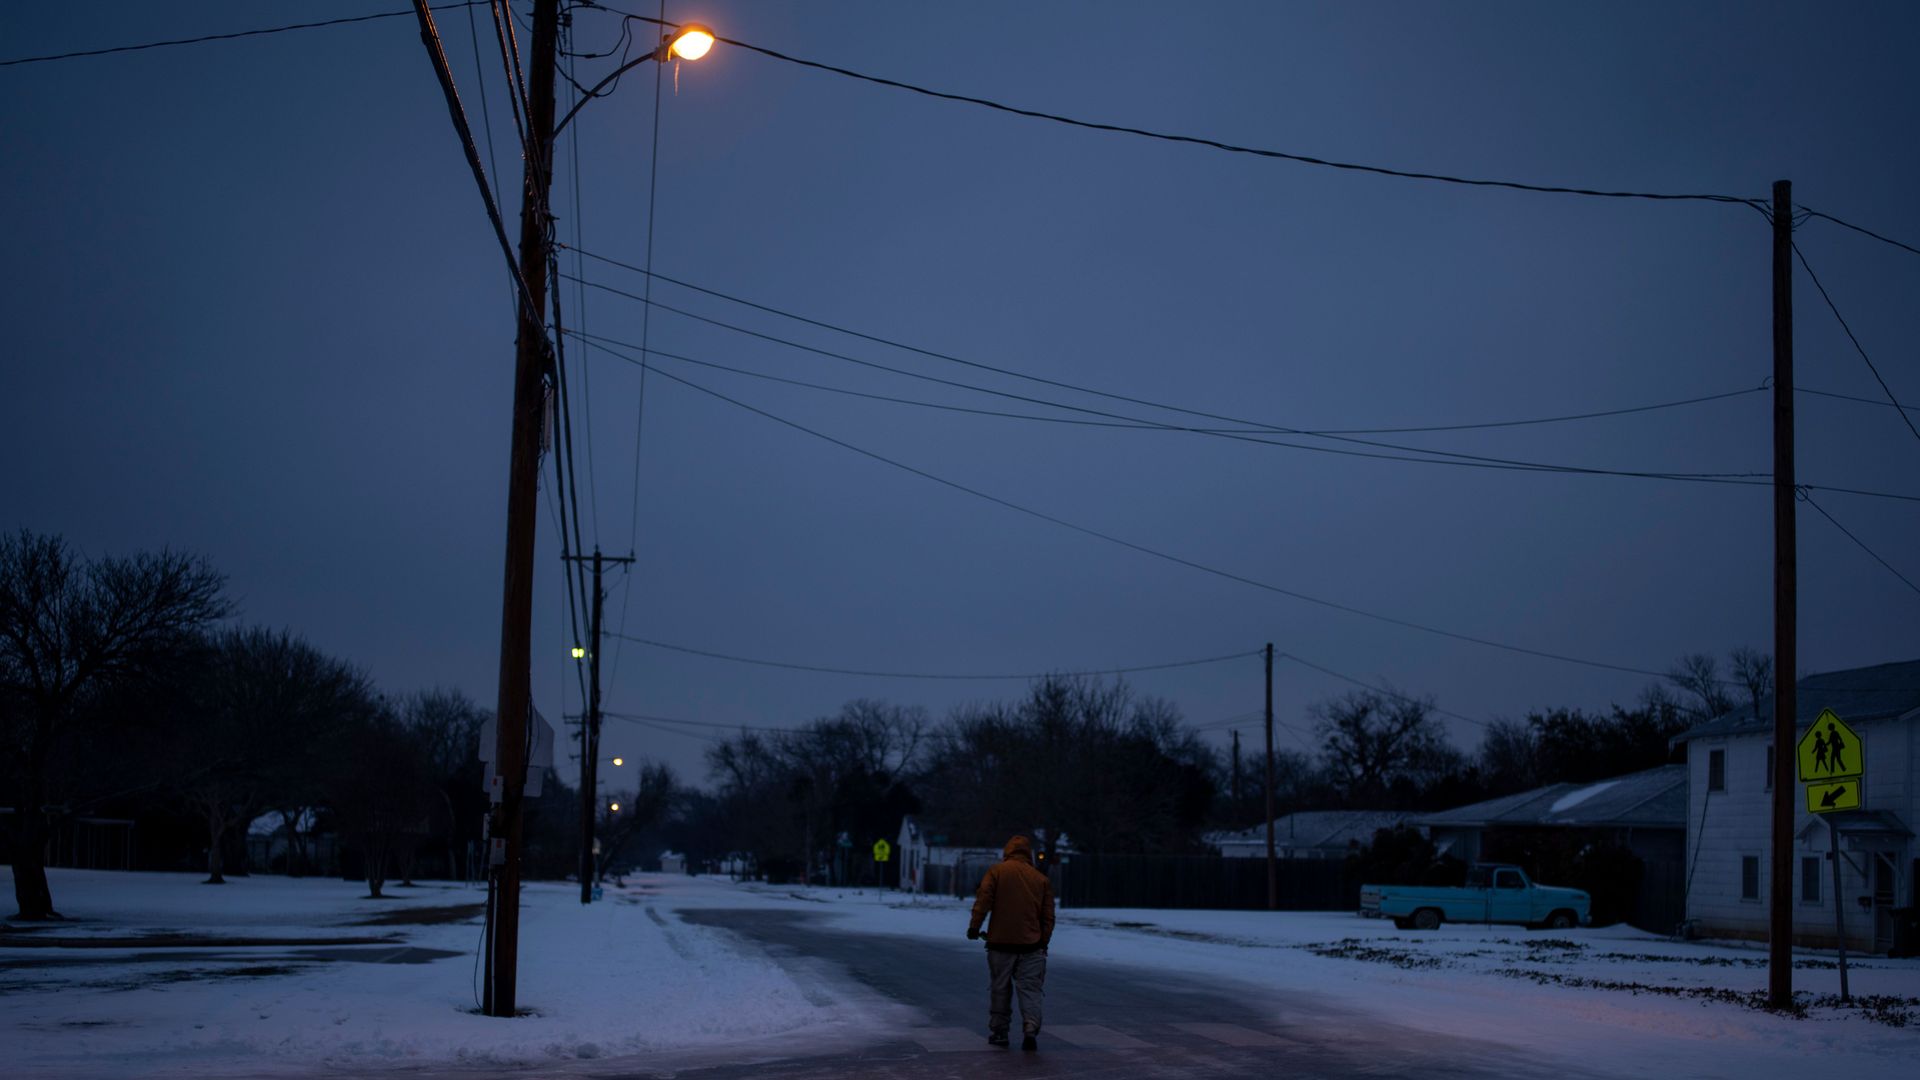 A neighborhood in Waco, Texas as severe winter weather conditions over the last few days has forced road closures and power outages over the state on February 17